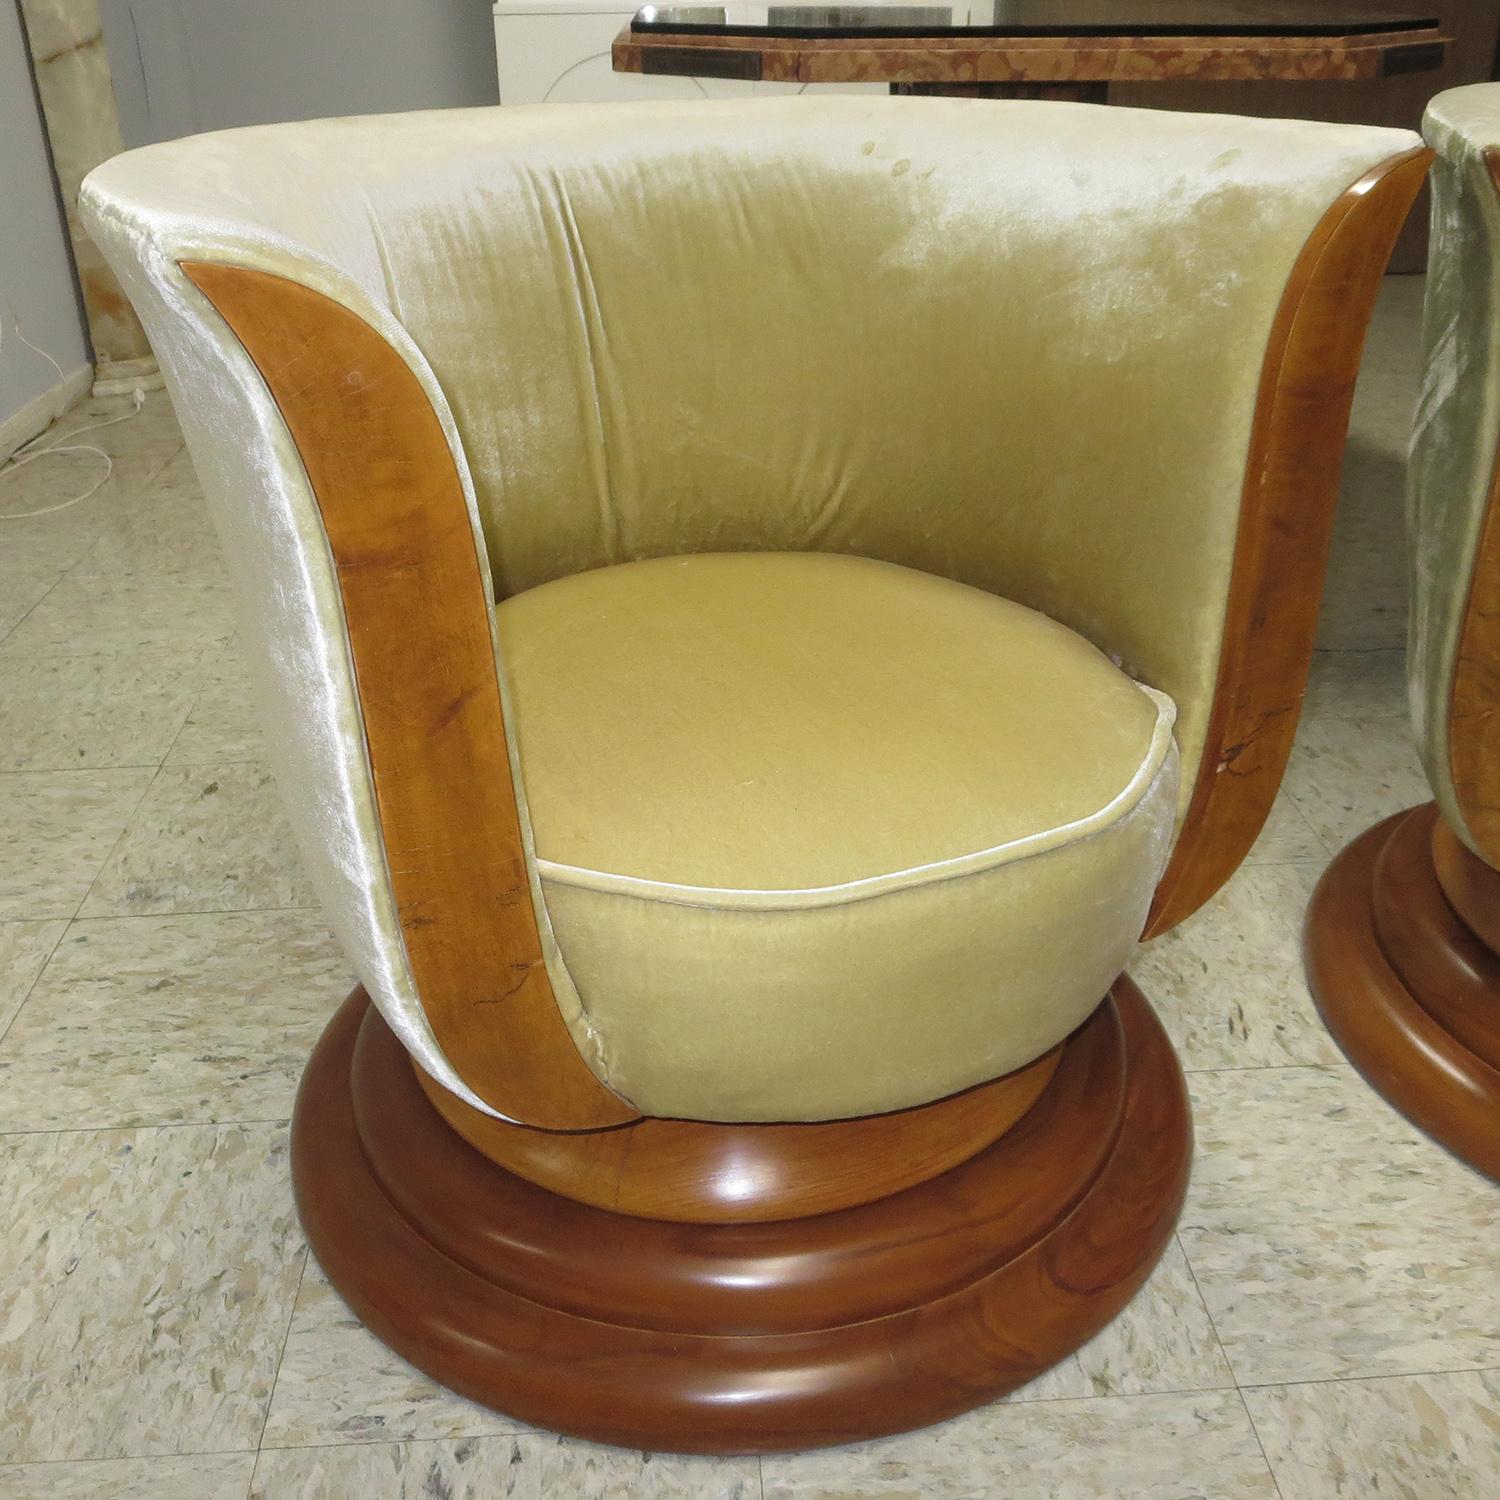 These fantastic 1930s Art Deco chairs are from the Hotel Le Malandre of Brussels Belgium. They both retain original metal tags to the underside. These are the originals that all the others were copied from! The solid walnut bases were previously